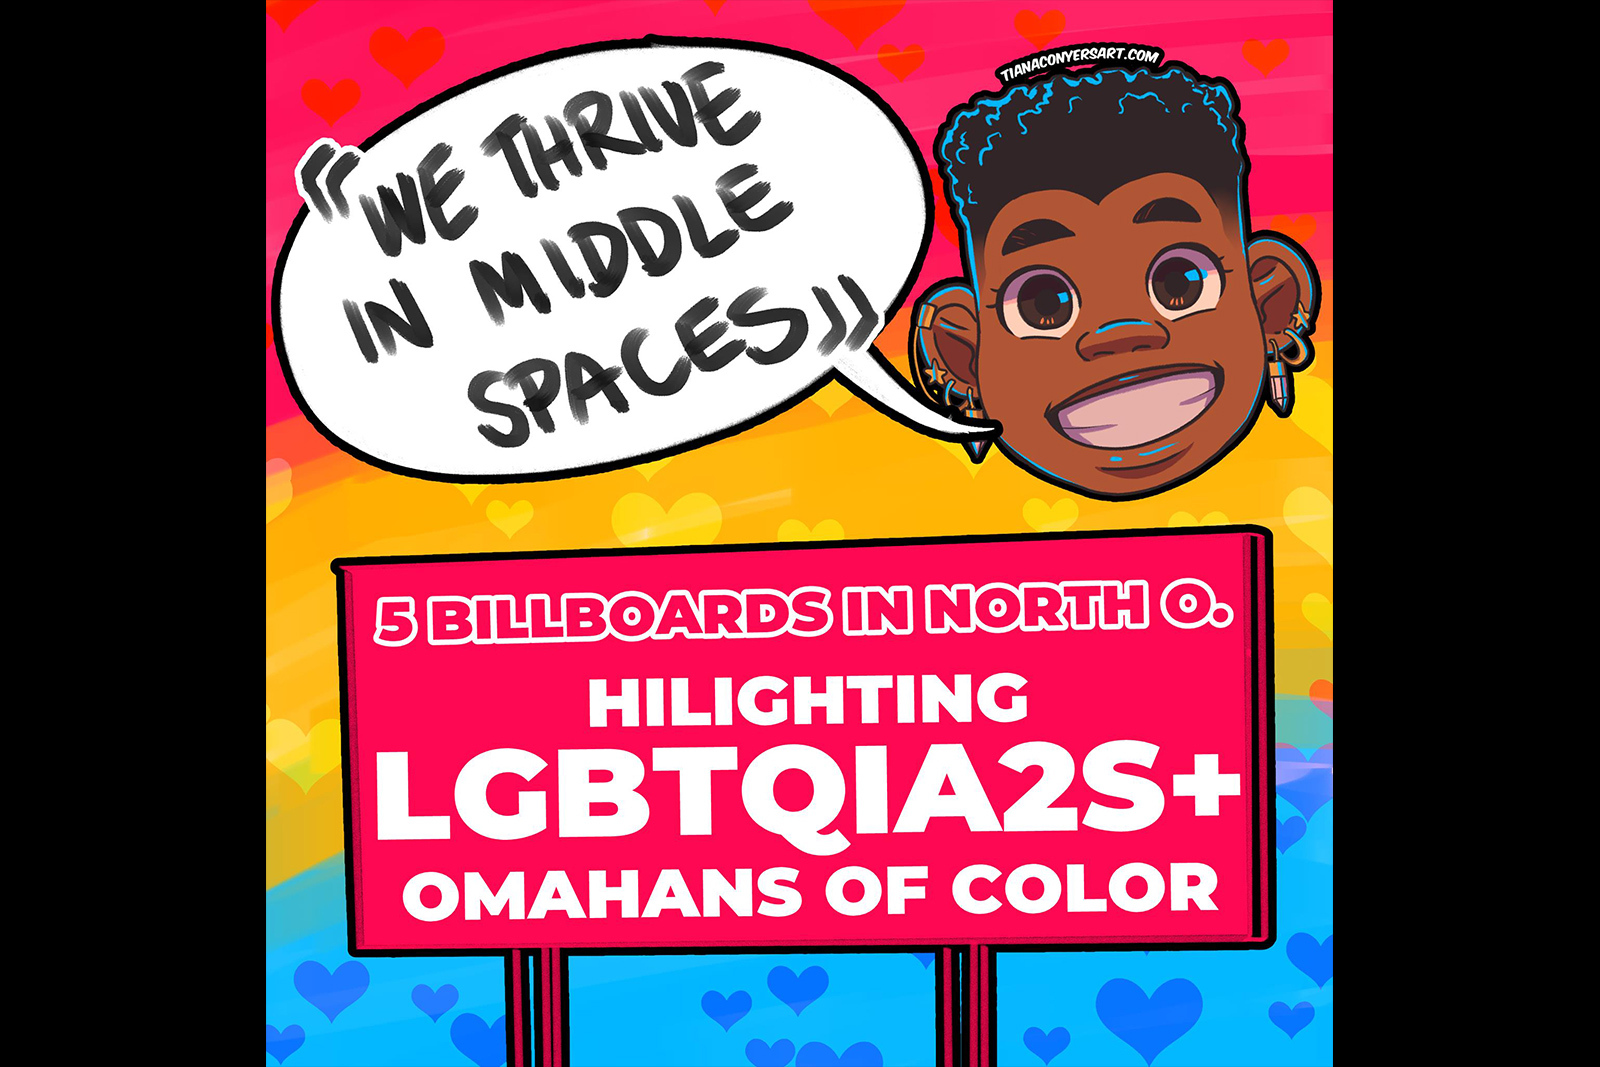 Art by Tiana Conyers - a smiling Black face with a comic word bubble that reads "We Thrive in Middle Spaces" above a red billboard that reads: 5 billboards in North O. Highlighting LGBTQIA2s+ Omahans of Color"